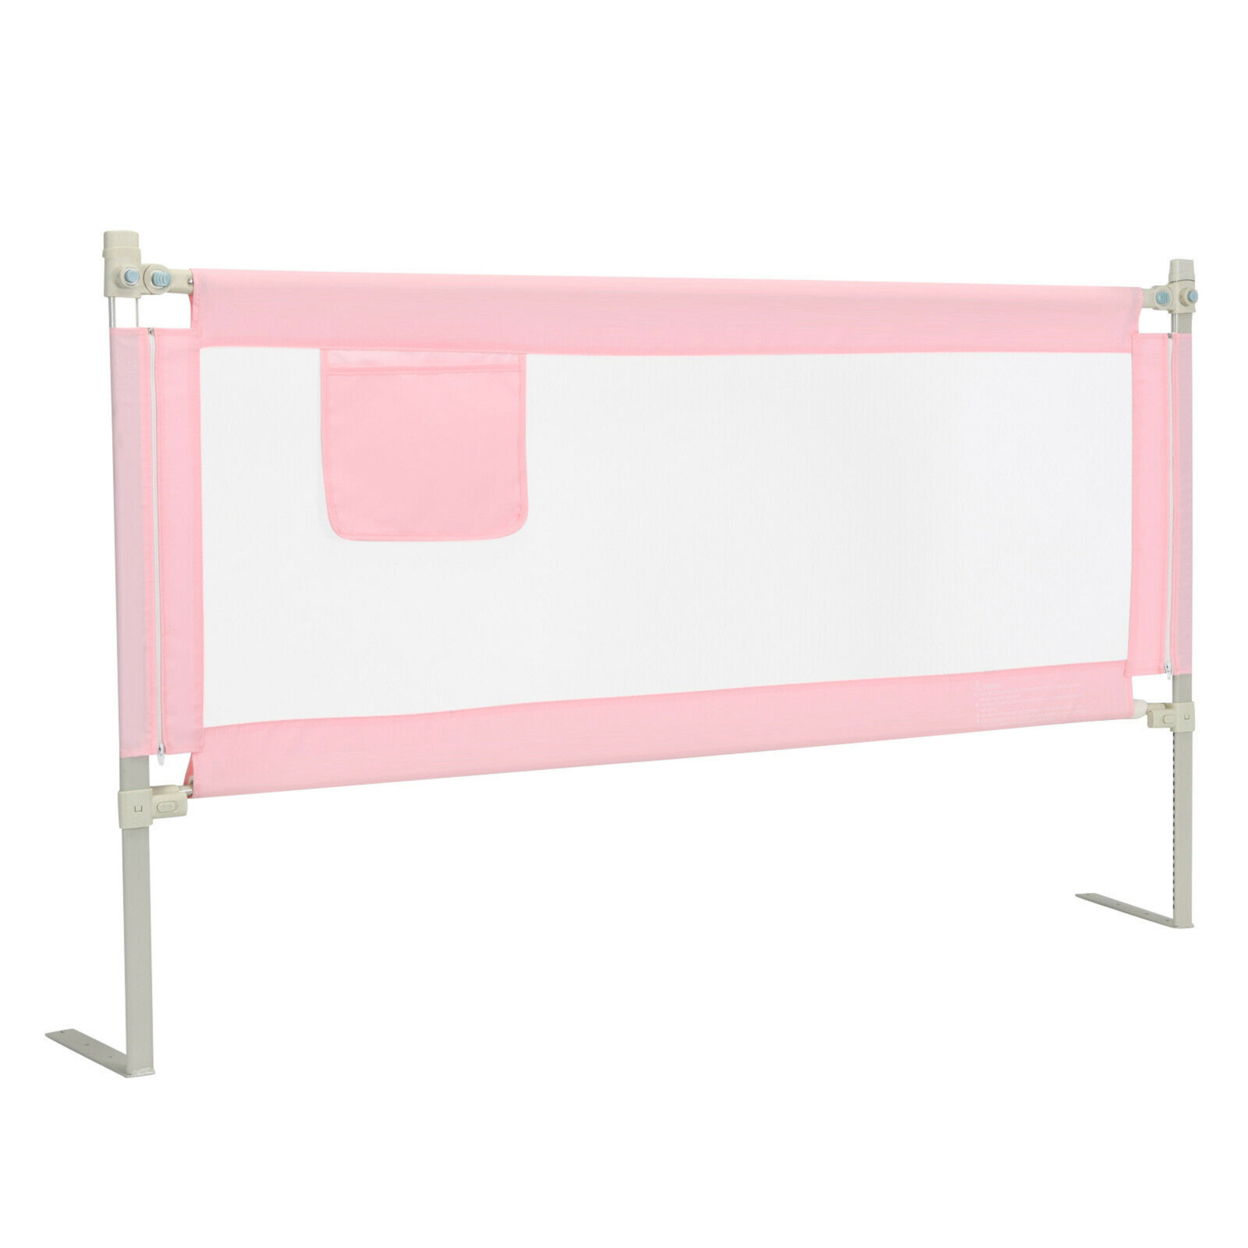 Gymax 69.5'' Bed Rails For Toddlers Vertical Lifting Baby Bed Rail Guard With Lock Grey / Pink - Pink